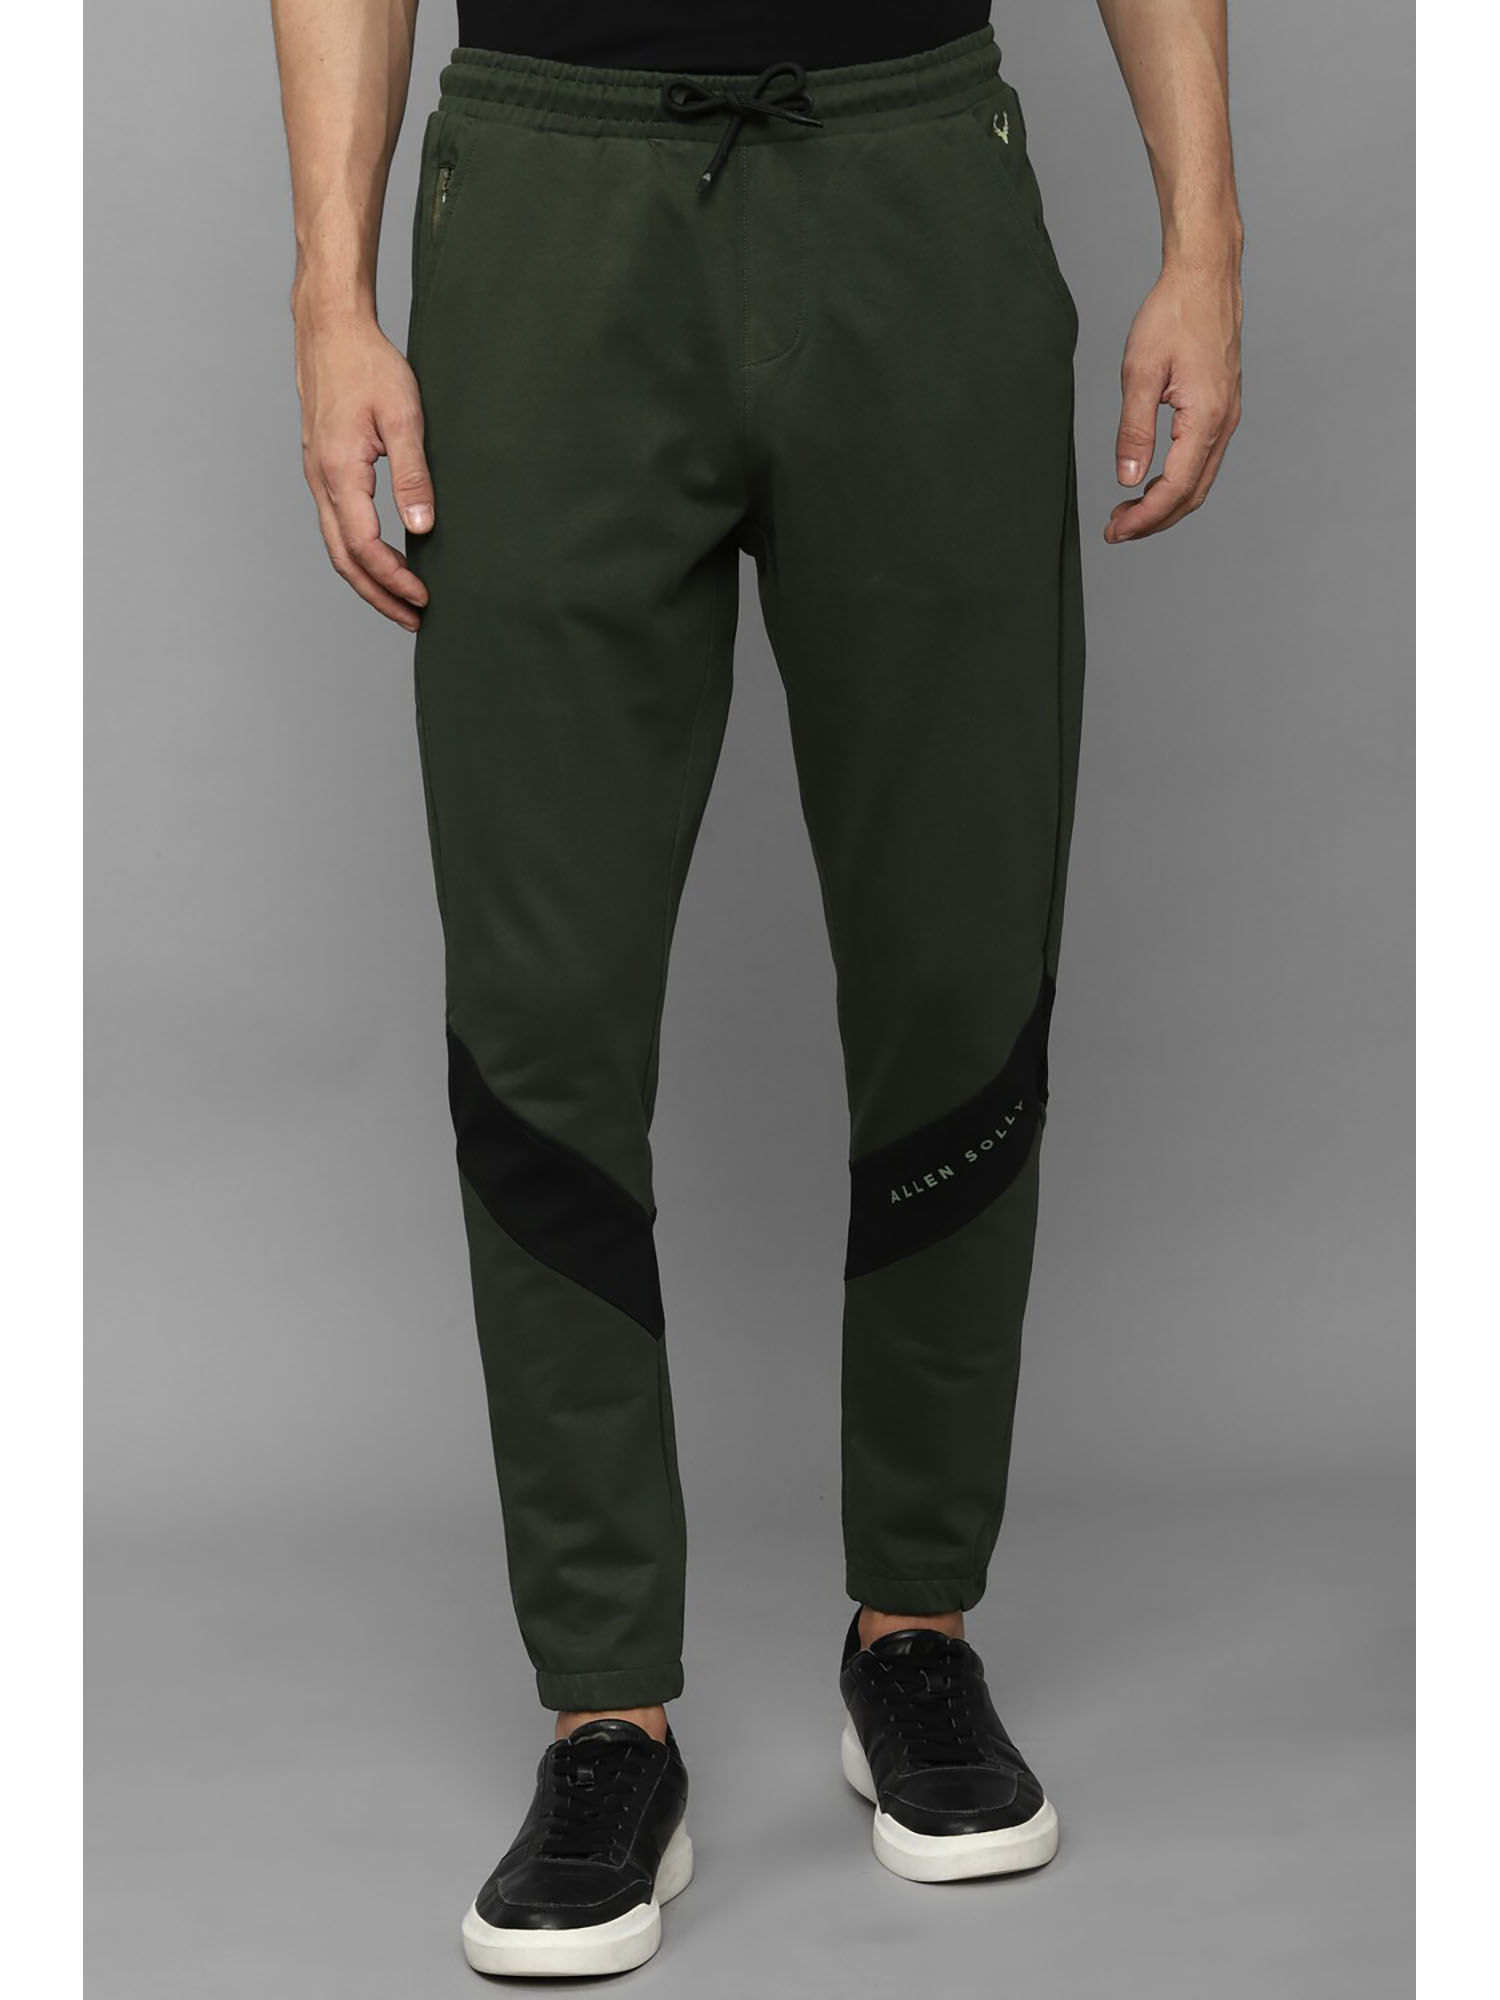 Allen Solly Tribe Men Green & Black Solid Track Pants - Price History